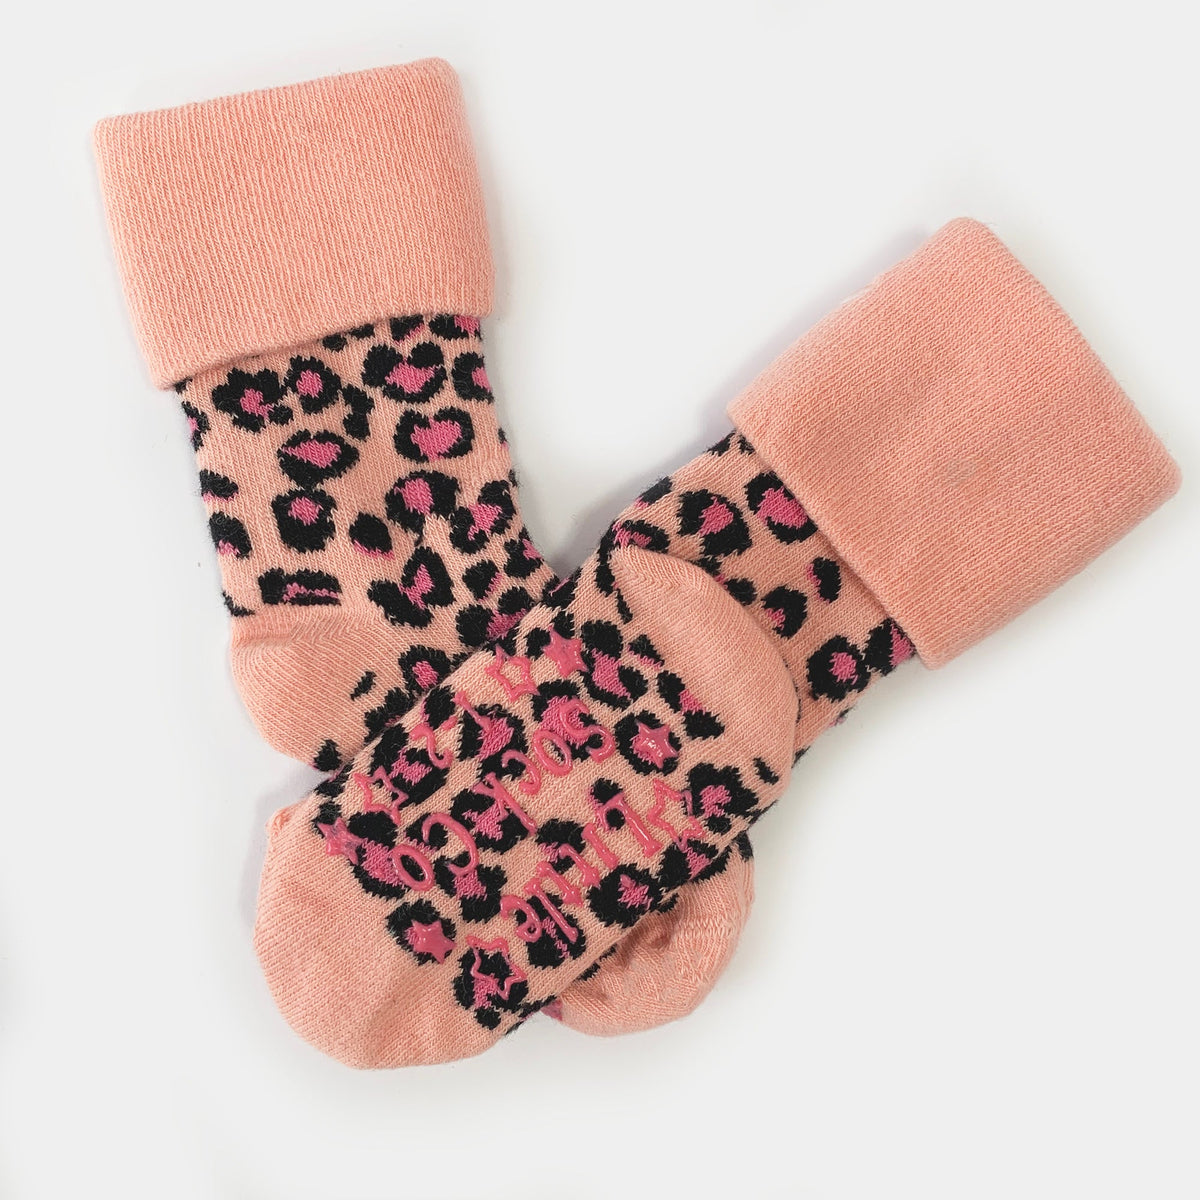 Non-Slip Stay On Baby and Toddler Socks - 5 Pack in Pink Animal, Navy & Fairytale